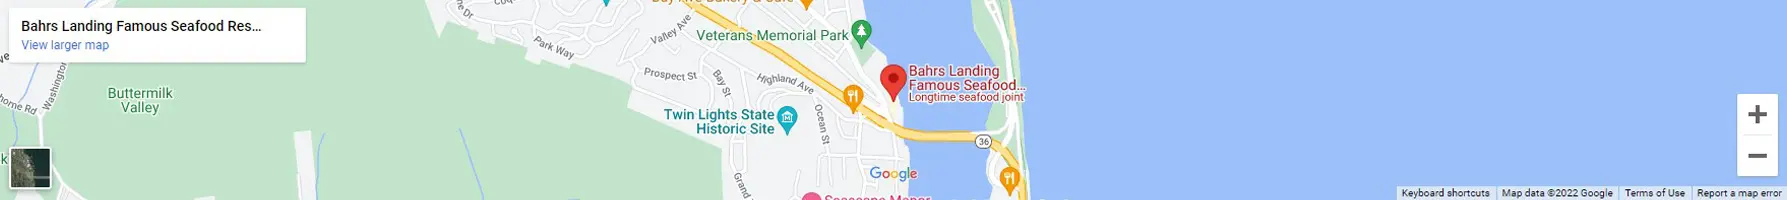 A map of bahrs landing and the location of the seafood restaurant.